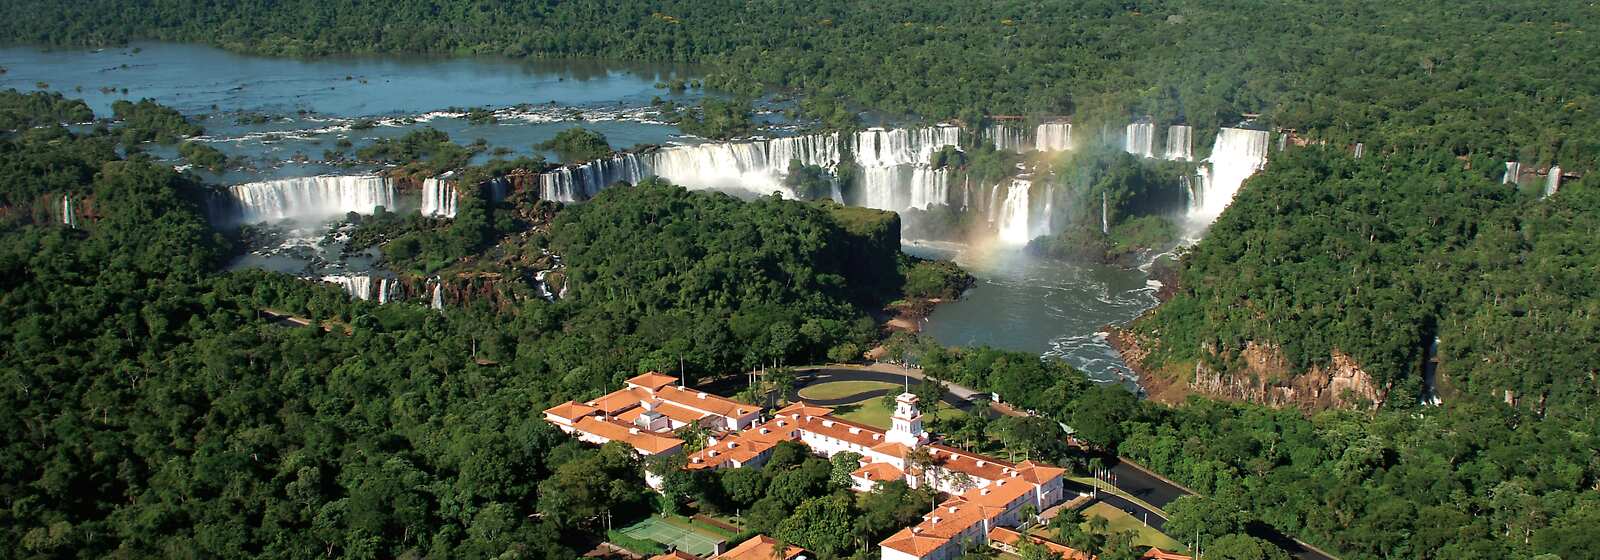 The only hotel located inside the National Park of Iguassu. Exclusive visiting hours for Hotel das Cataratas, A Belmond Hotel guests.